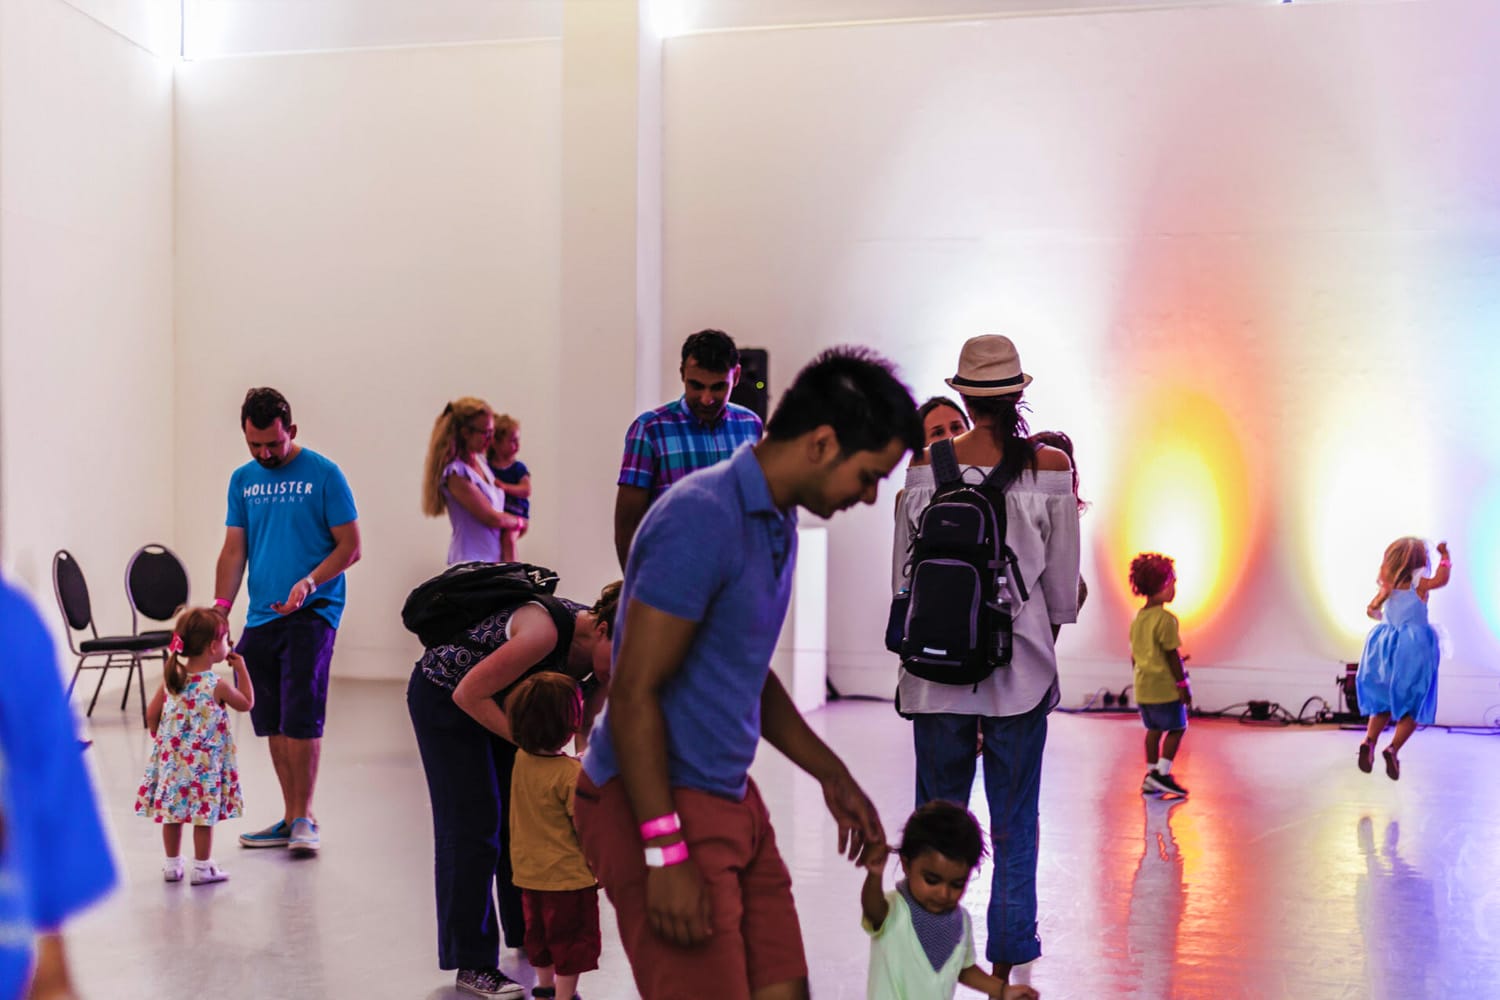 Several families are dancing together in an open space where brightly coloured lights are projected onto the walls.